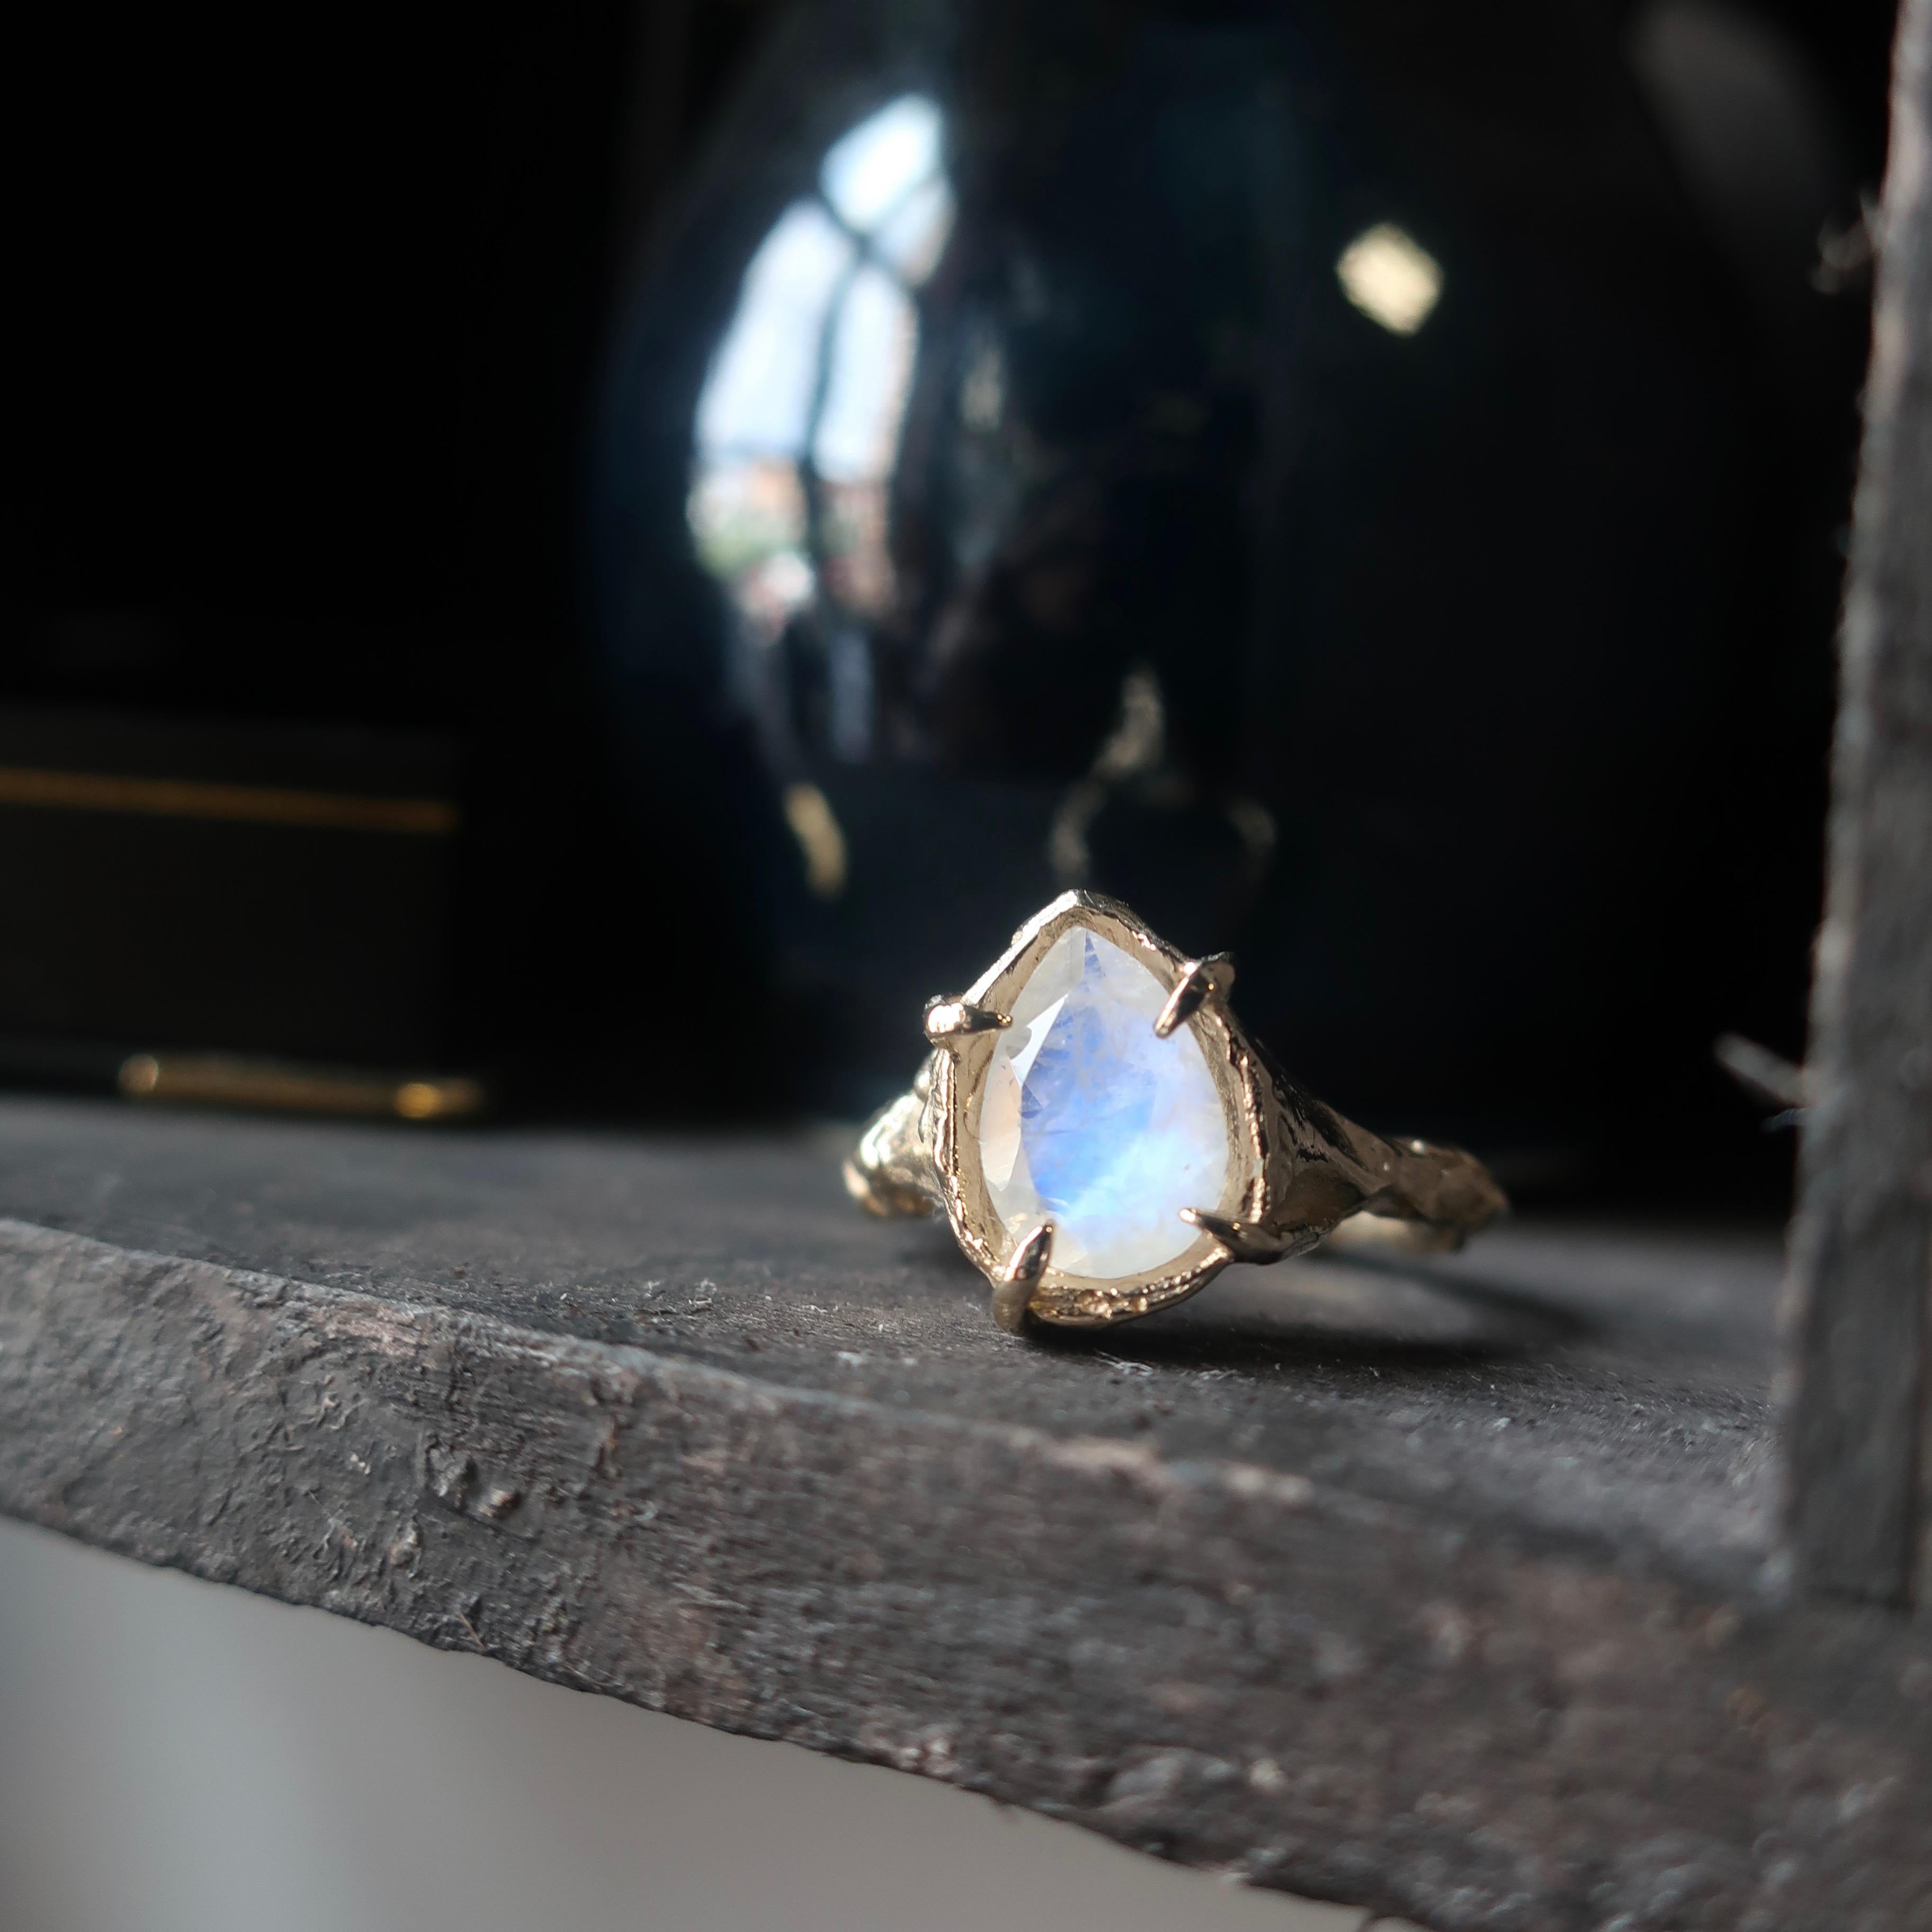 A 10x7 mm rainbow moonstone in a solid 14K yellow gold setting. This features a hand carved shank and 4 prong setting. 

Ready to ship size 6

